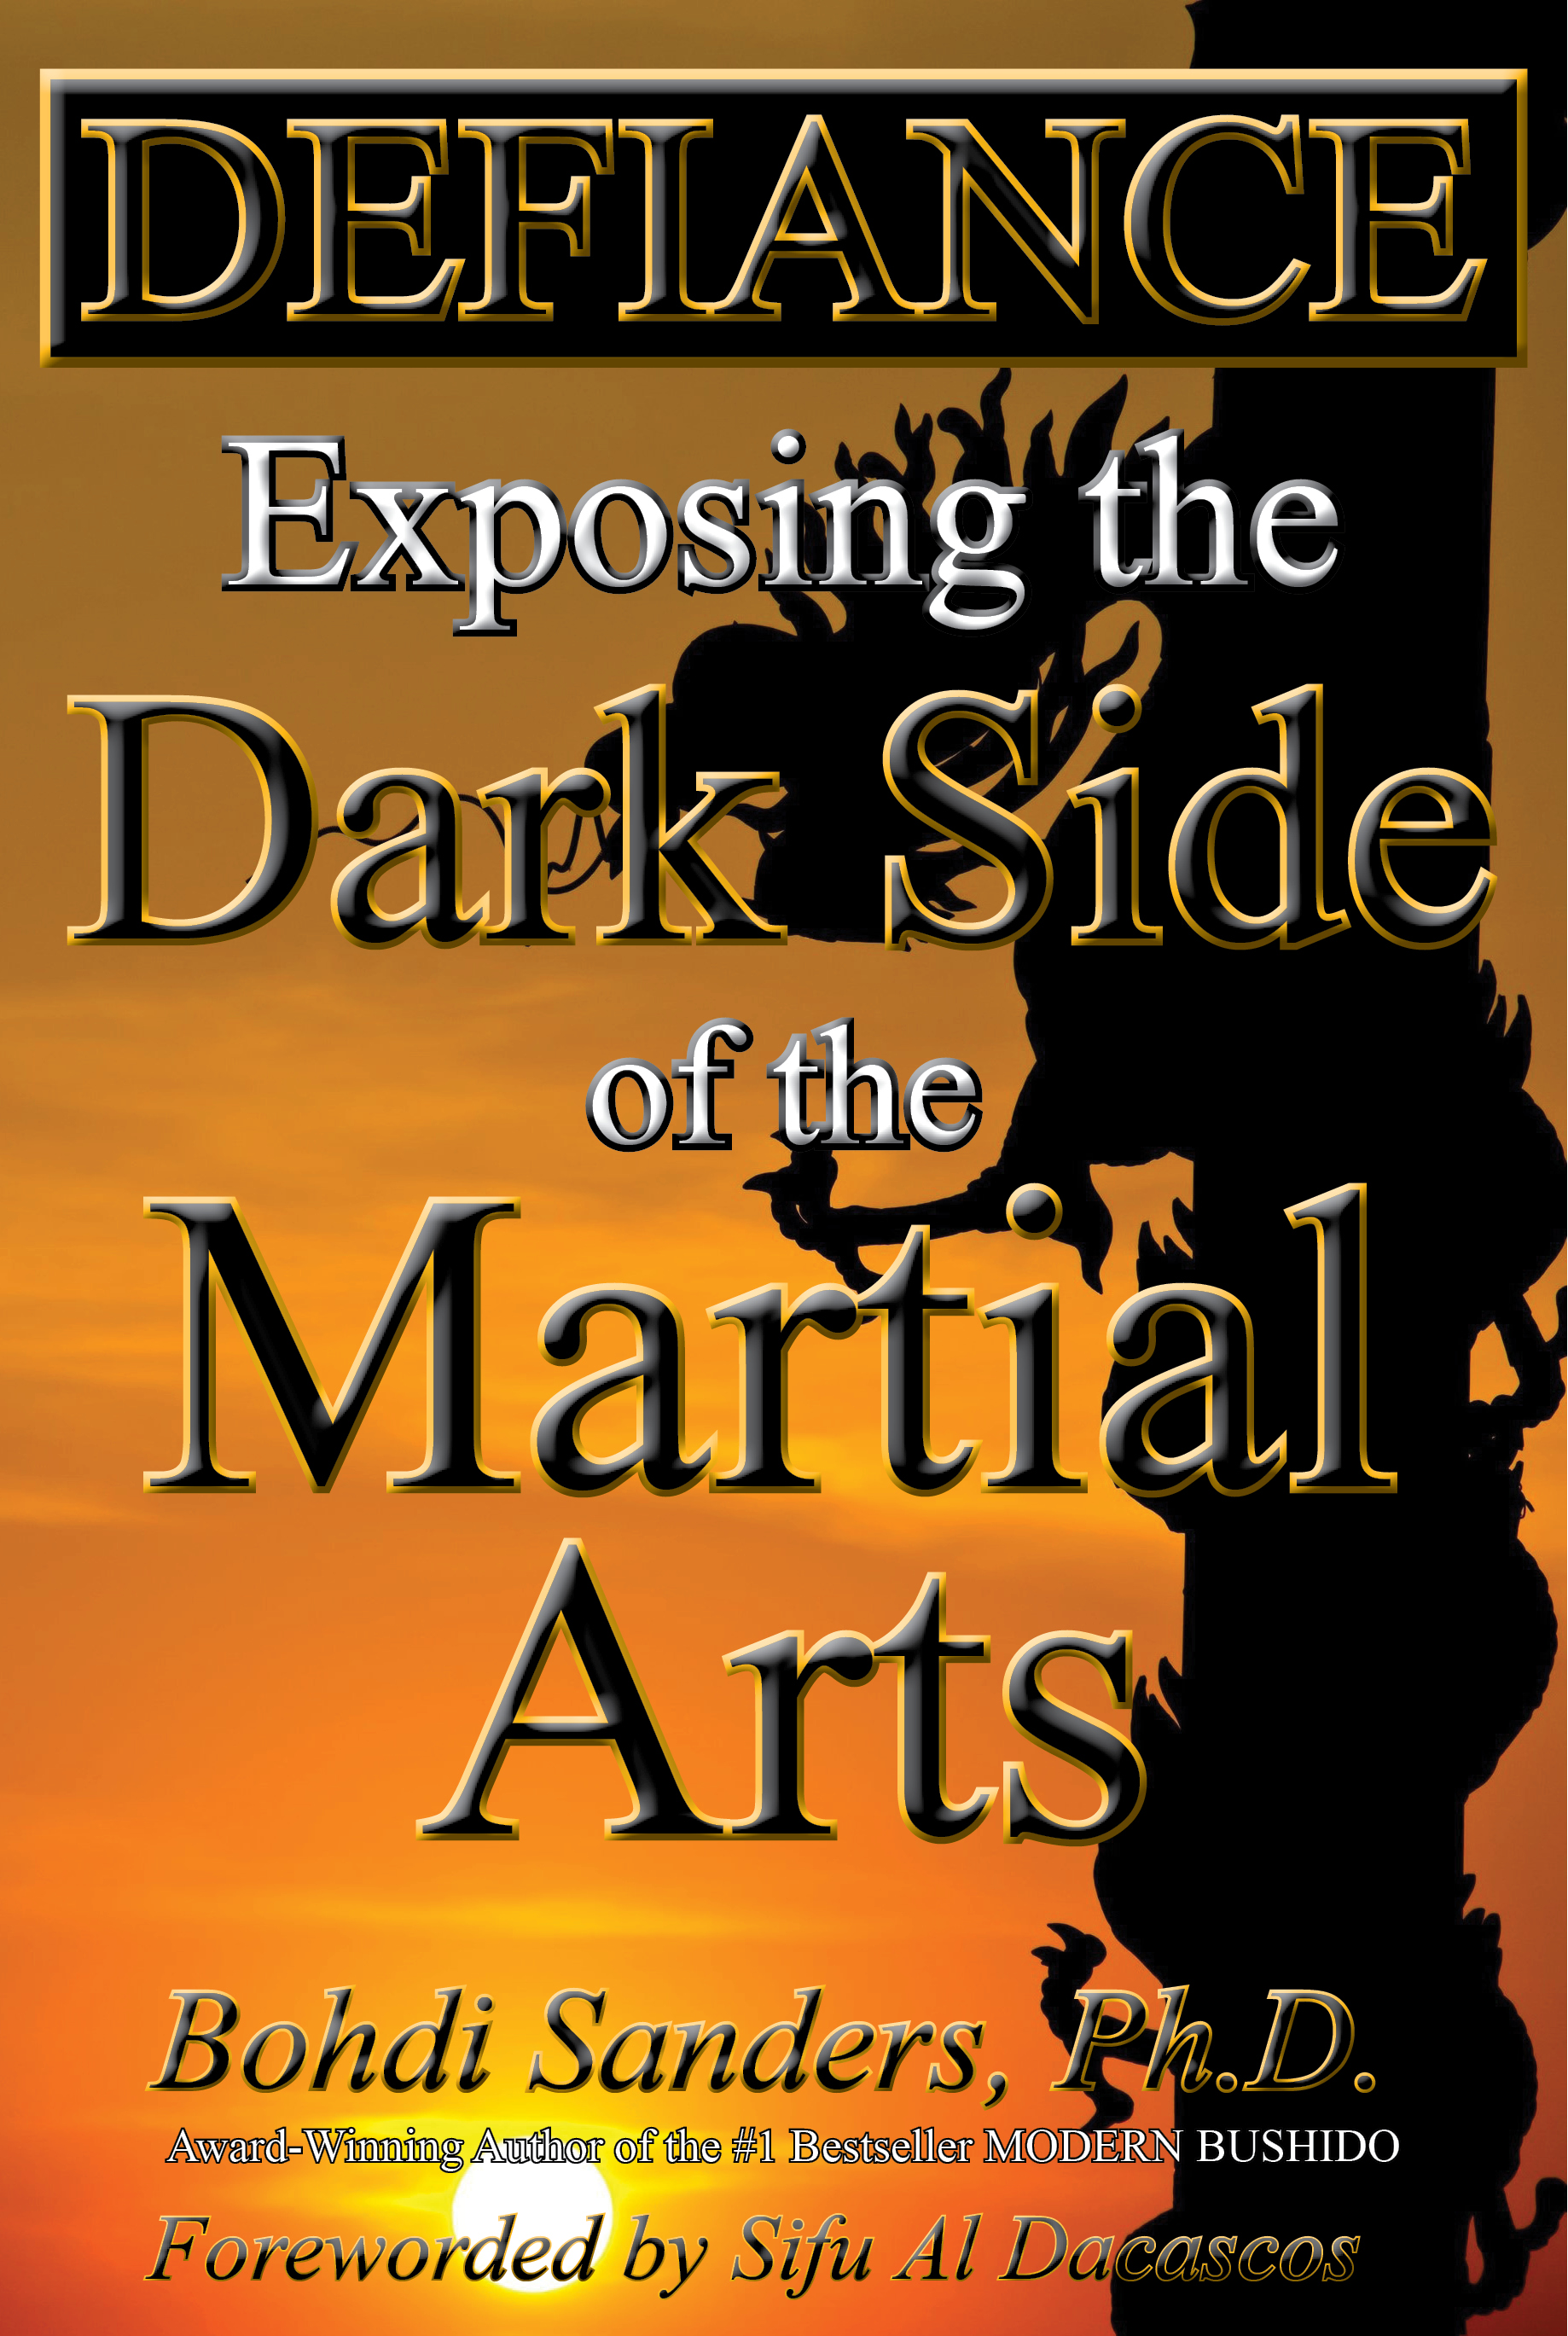 DEFIANCE: Exposing the Dark Side of the Martial Arts - Bohdi Sanders